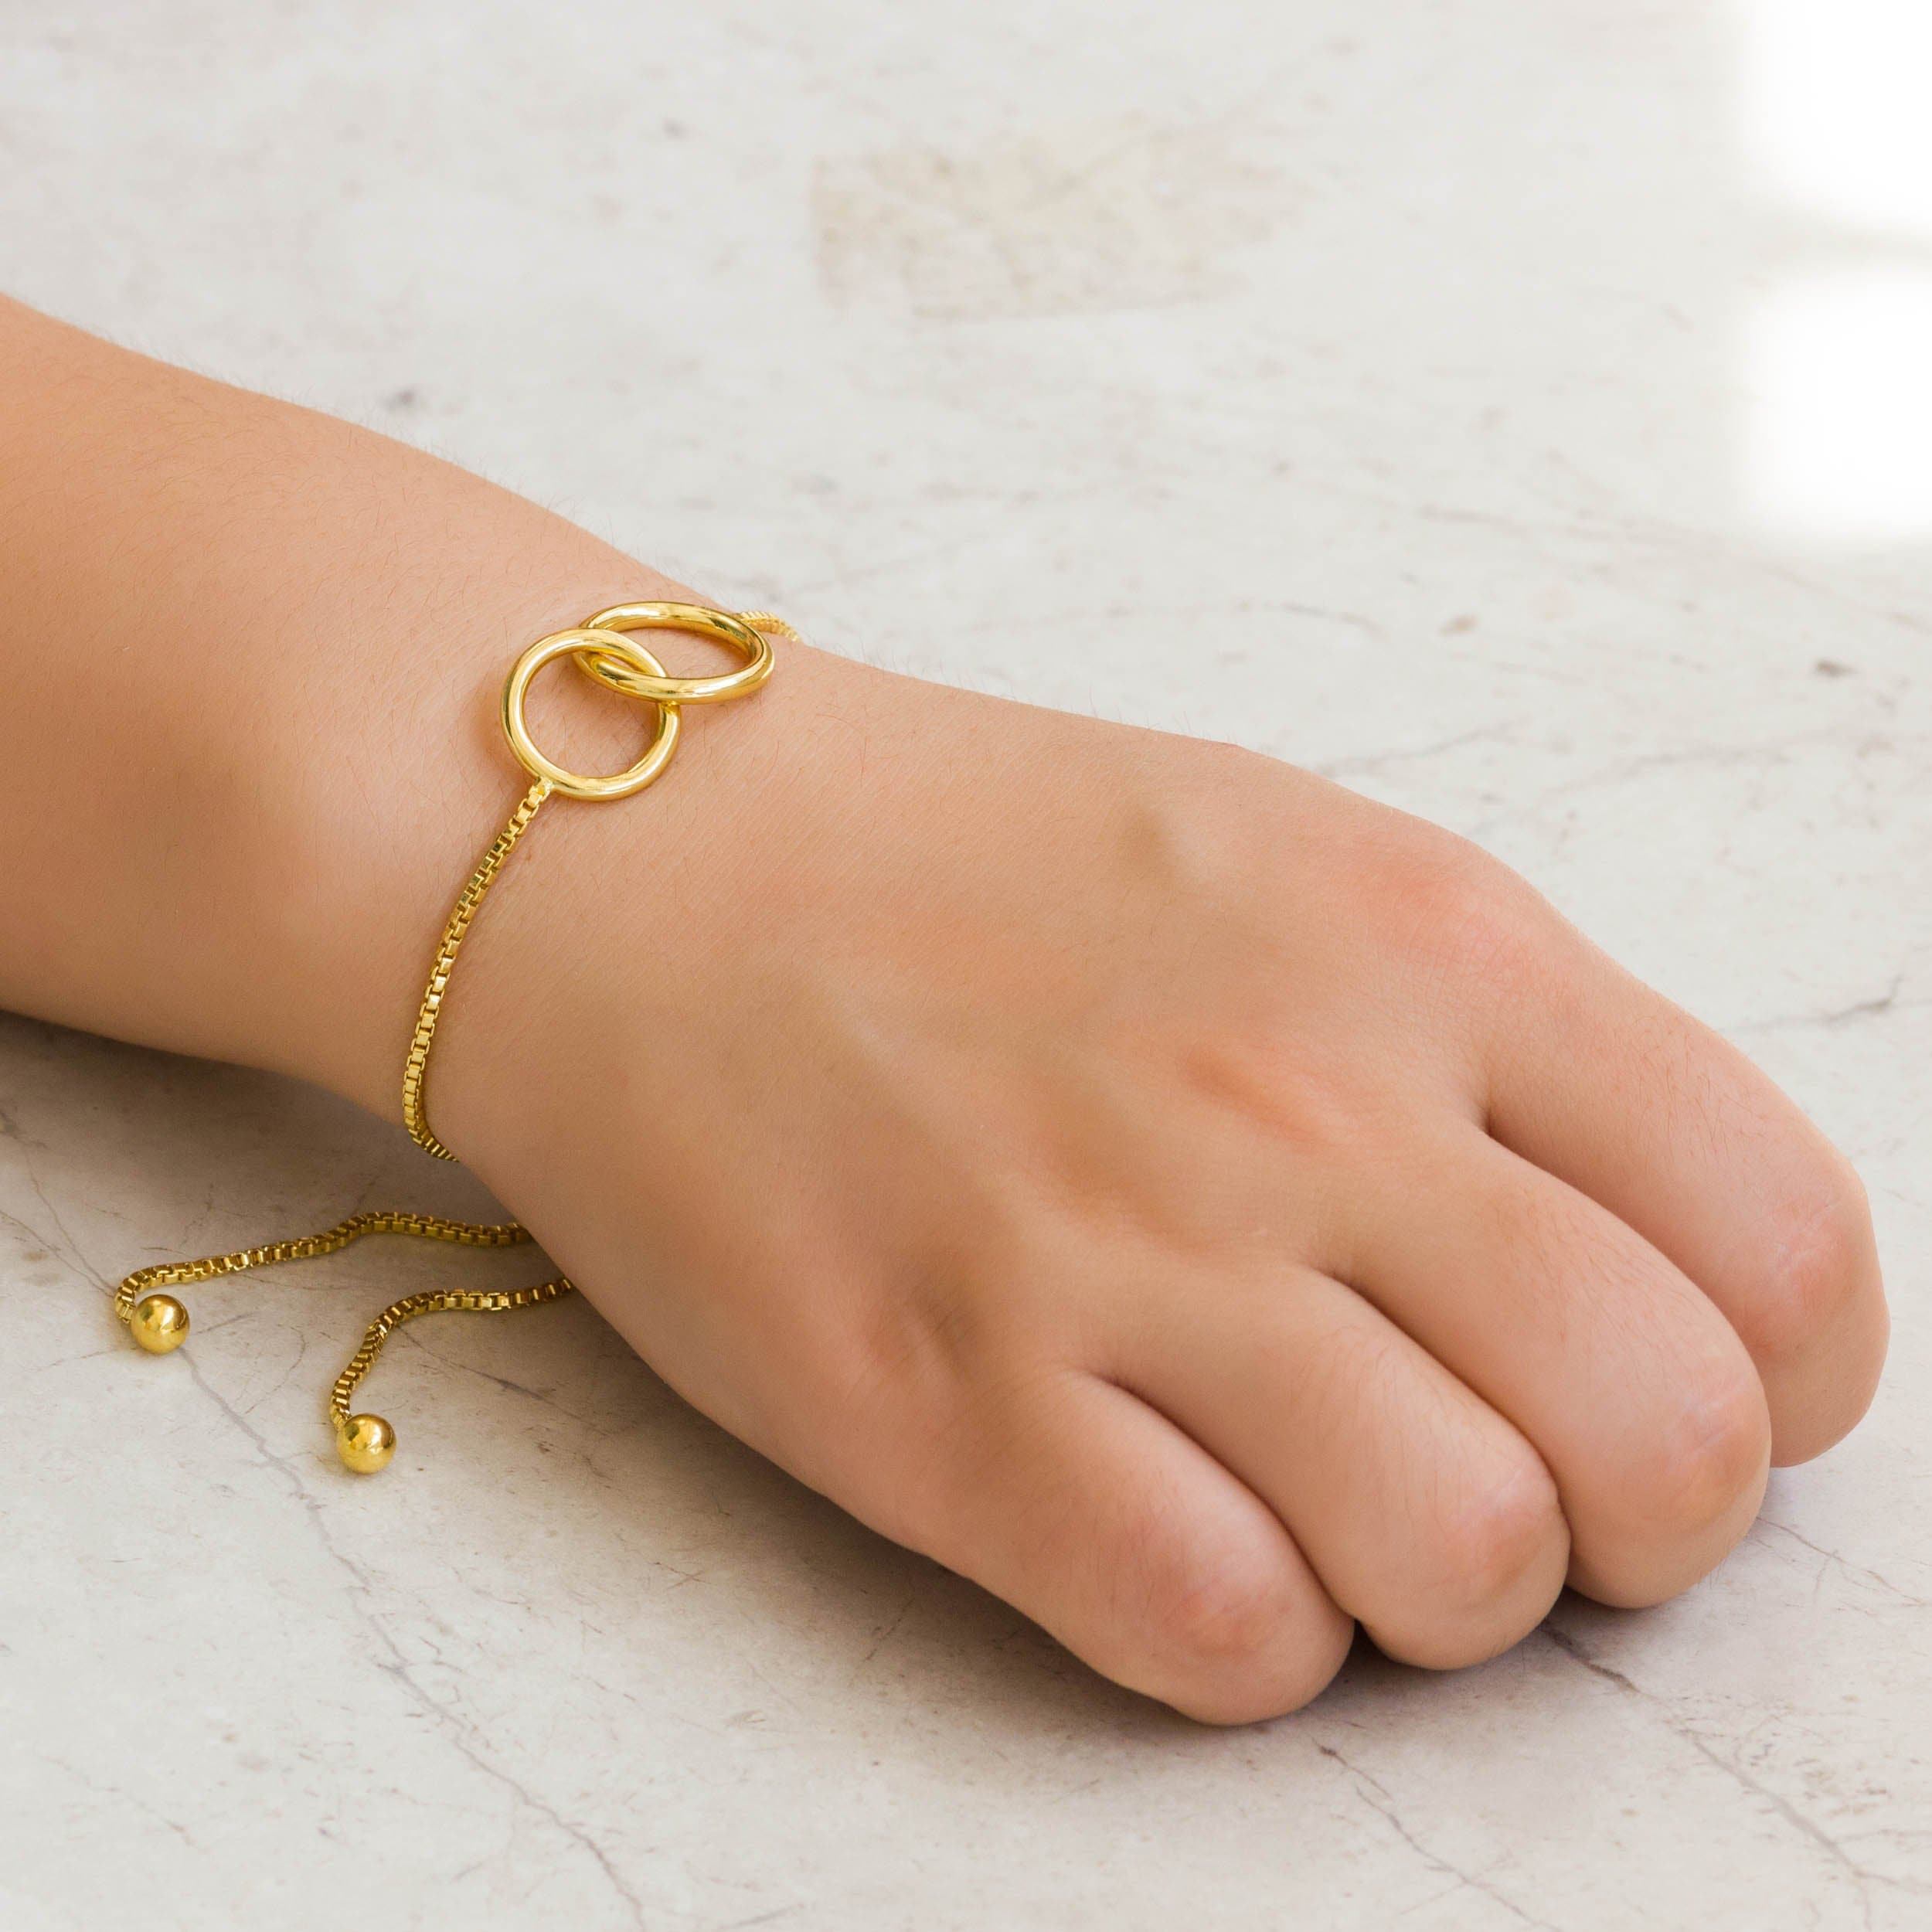 Gold Plated Link Friendship Bracelet Created with Zircondia® Crystals